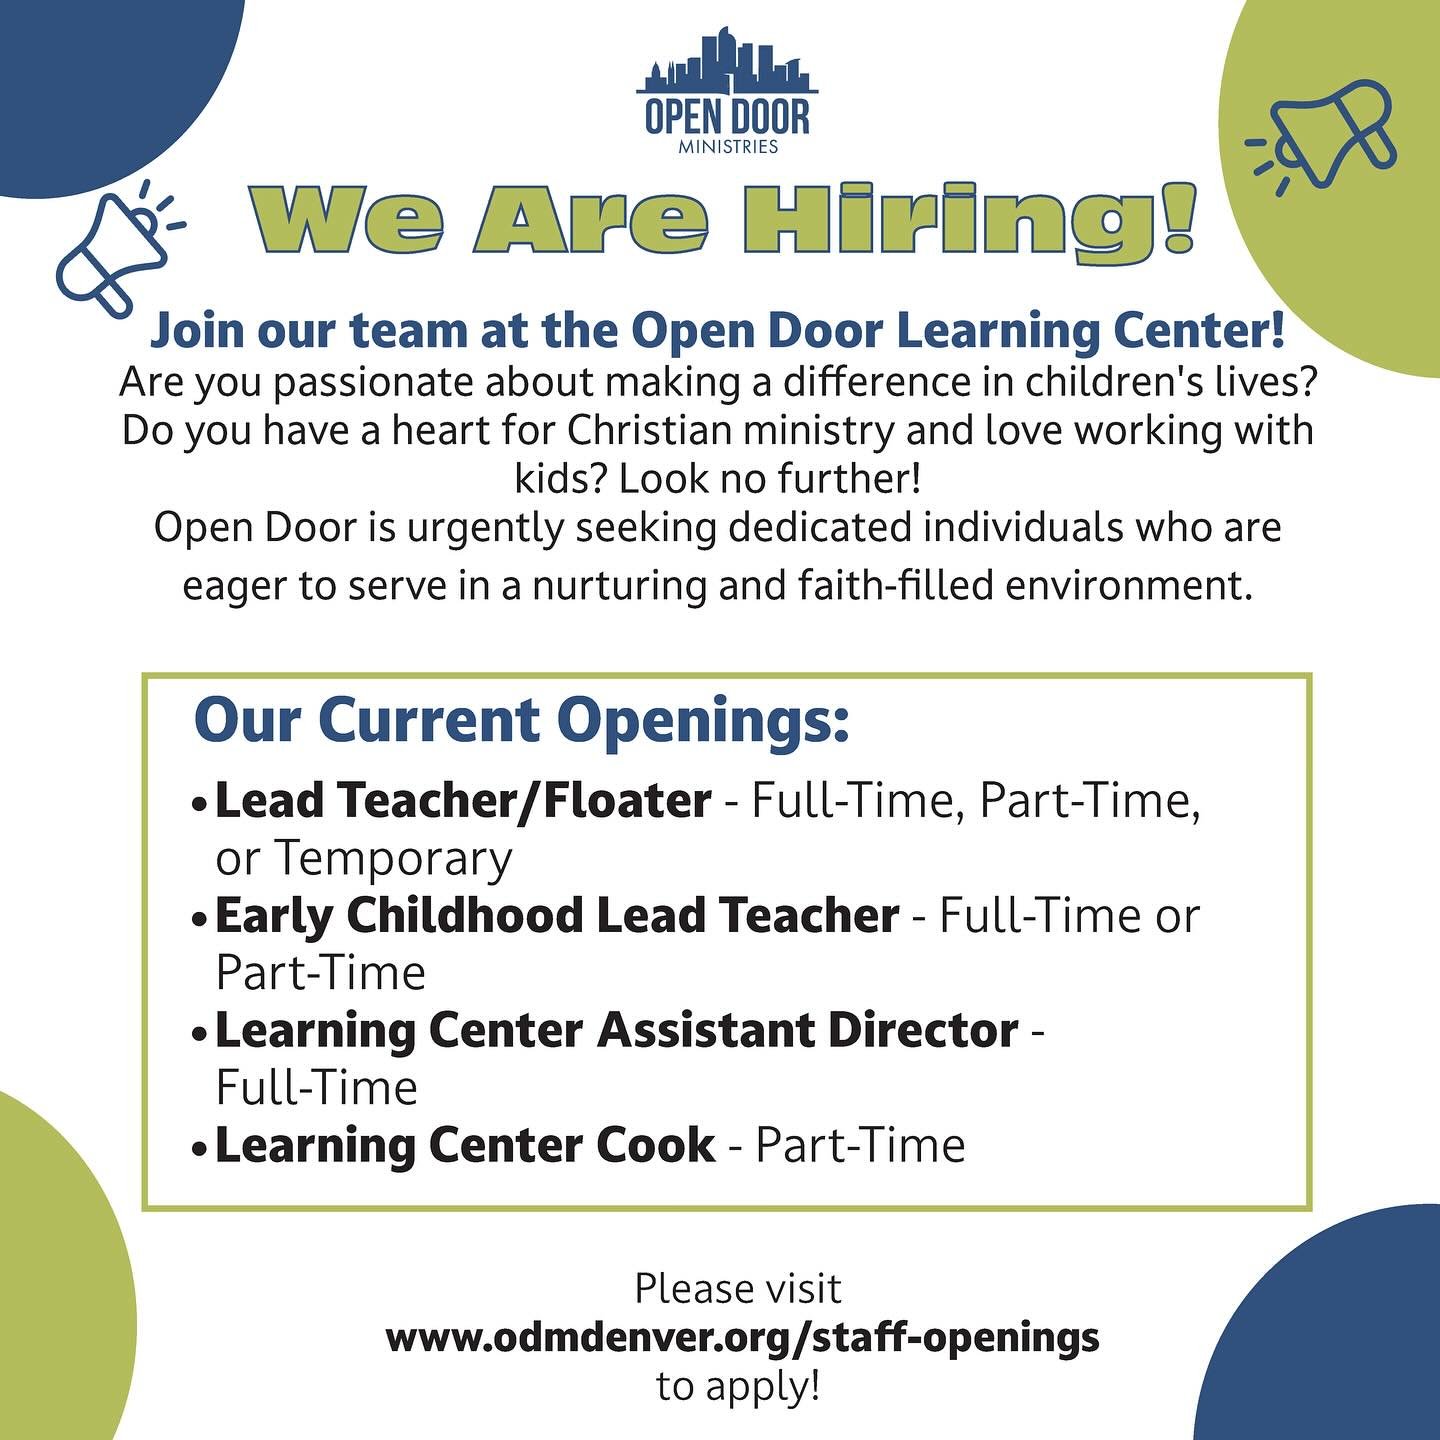 🚨HELP WANTED🚨
We are urgently hiring for multiple positions in our Learning Center:
⭐️ Lead Teacher/Floater
⭐️ Early Childhood Lead Teacher
⭐️ Learning Center Assistant Director 
⭐️ Learning Center Cook

Join our passionate team and make a differen